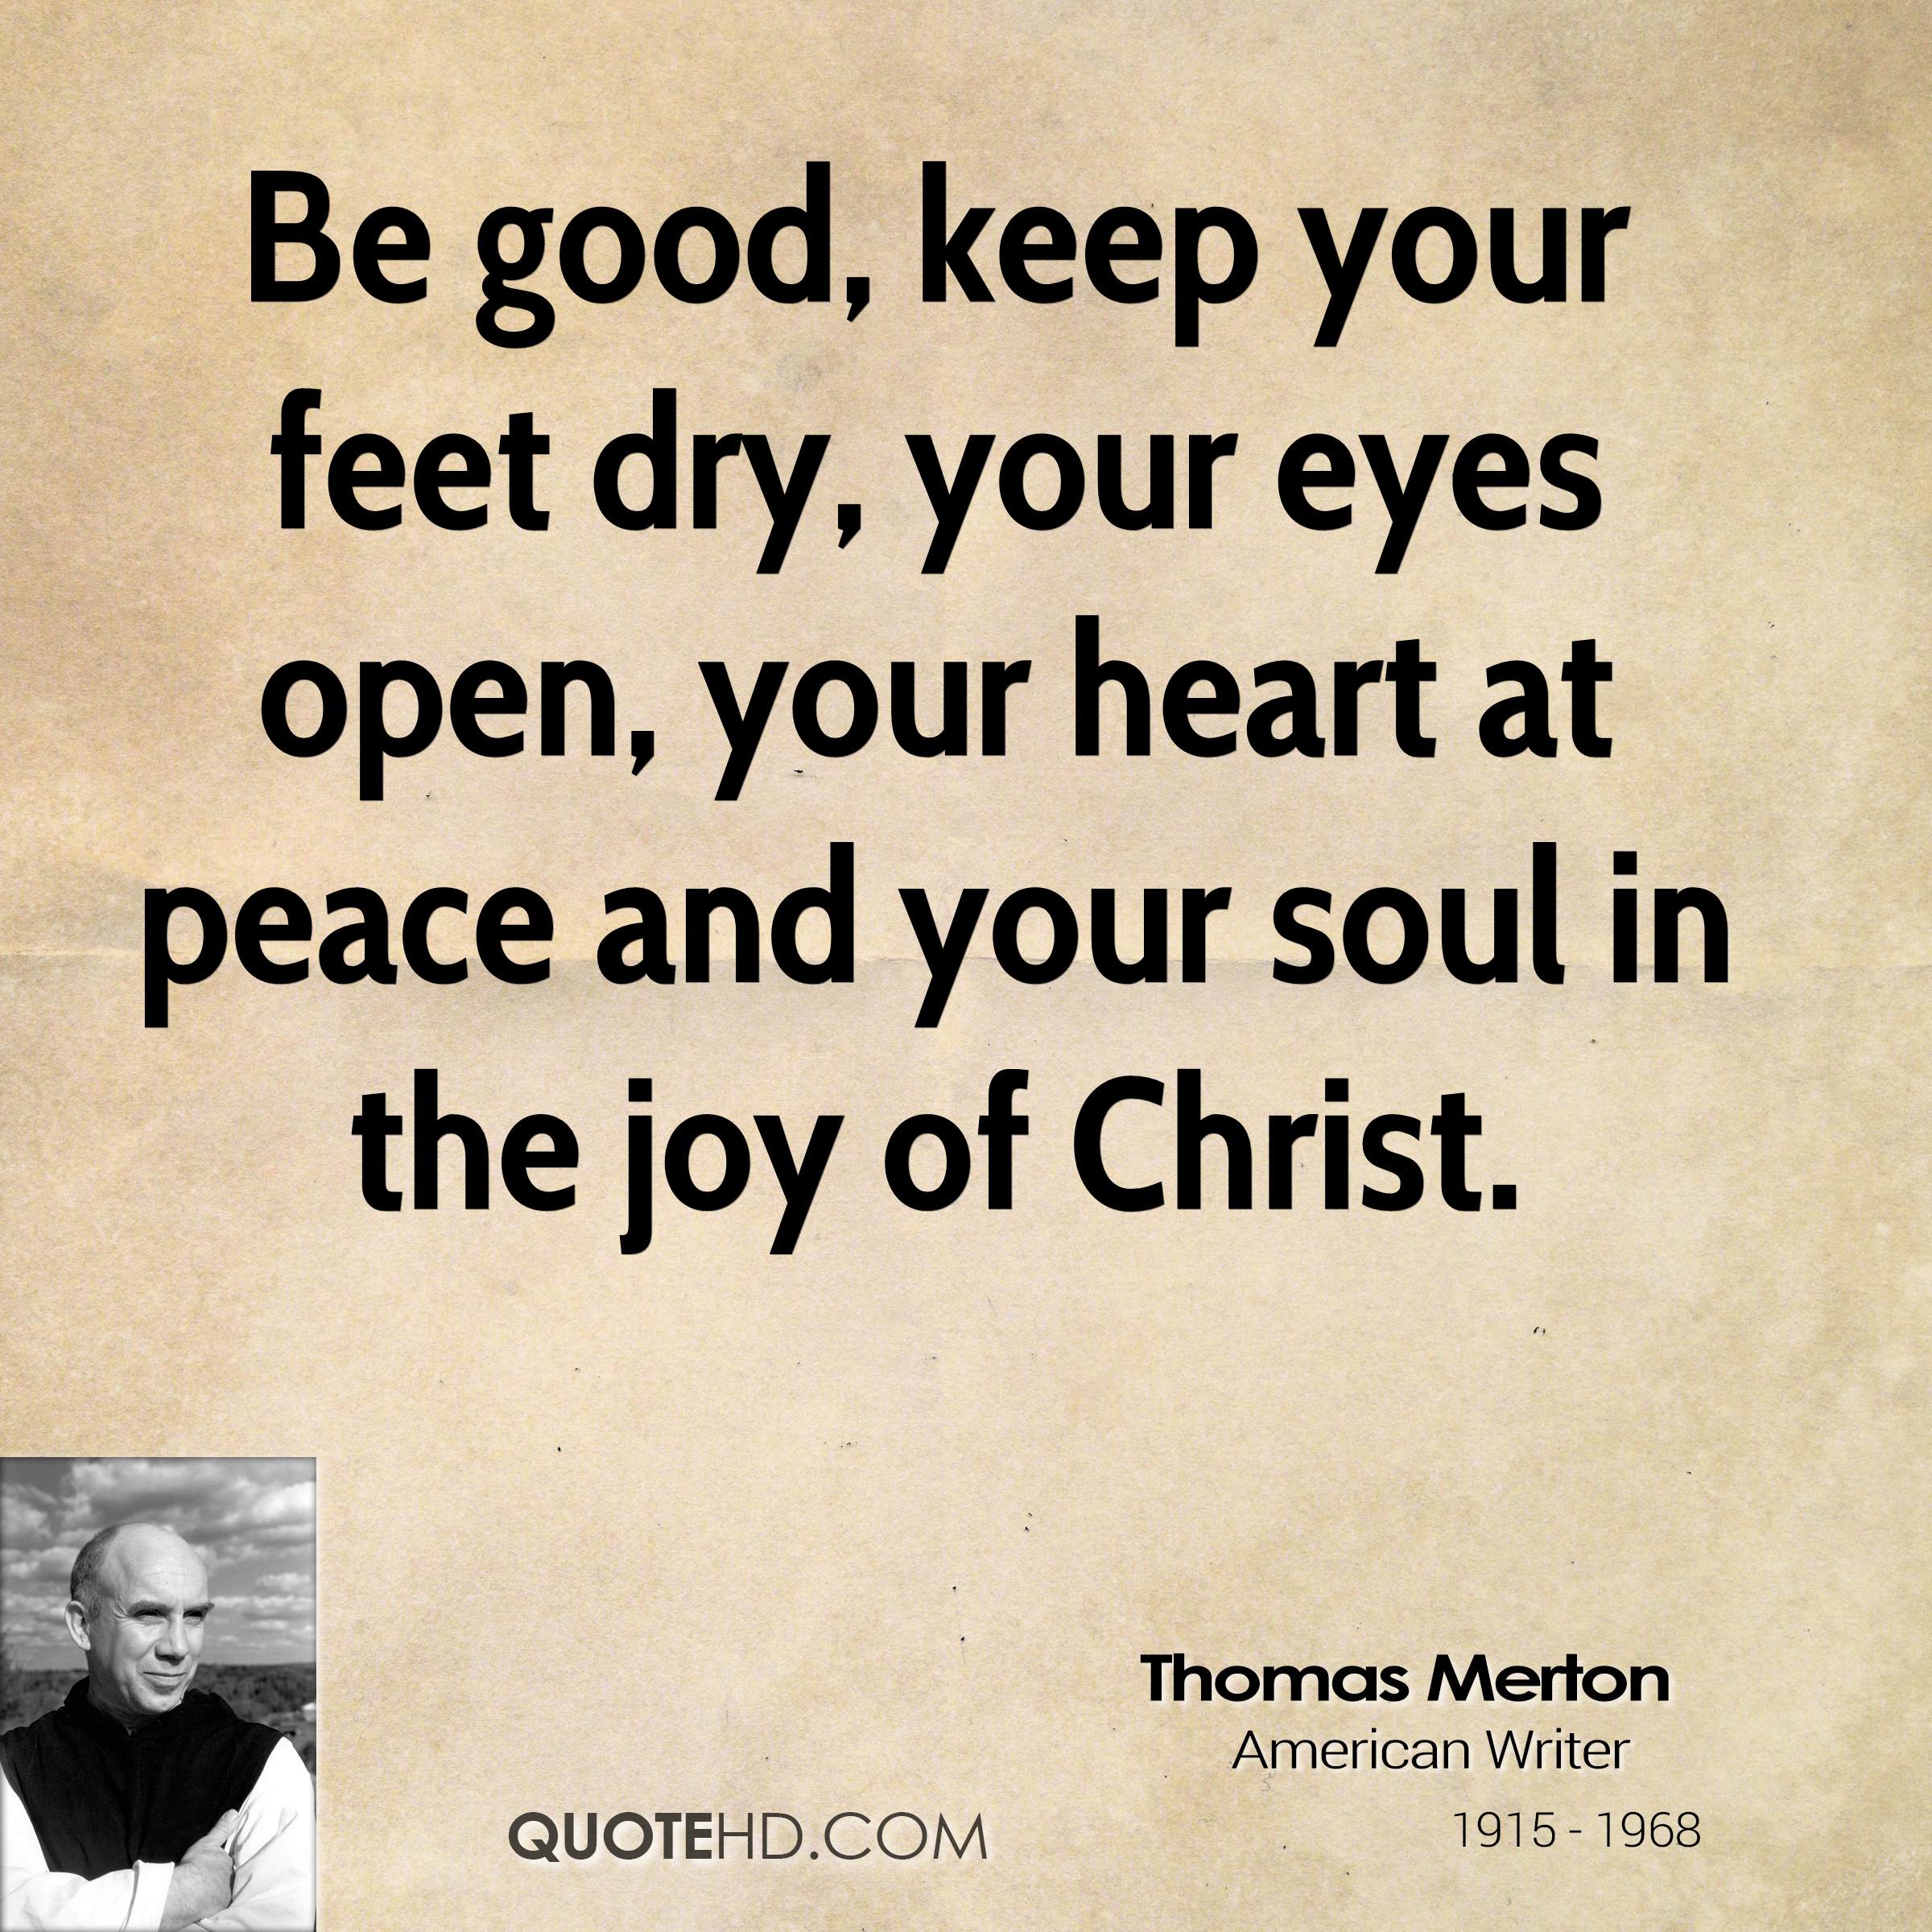 Be good, keep your feet dry, your eyes open, your heart at peace and your soul in the joy of Christ. Thomas Merton